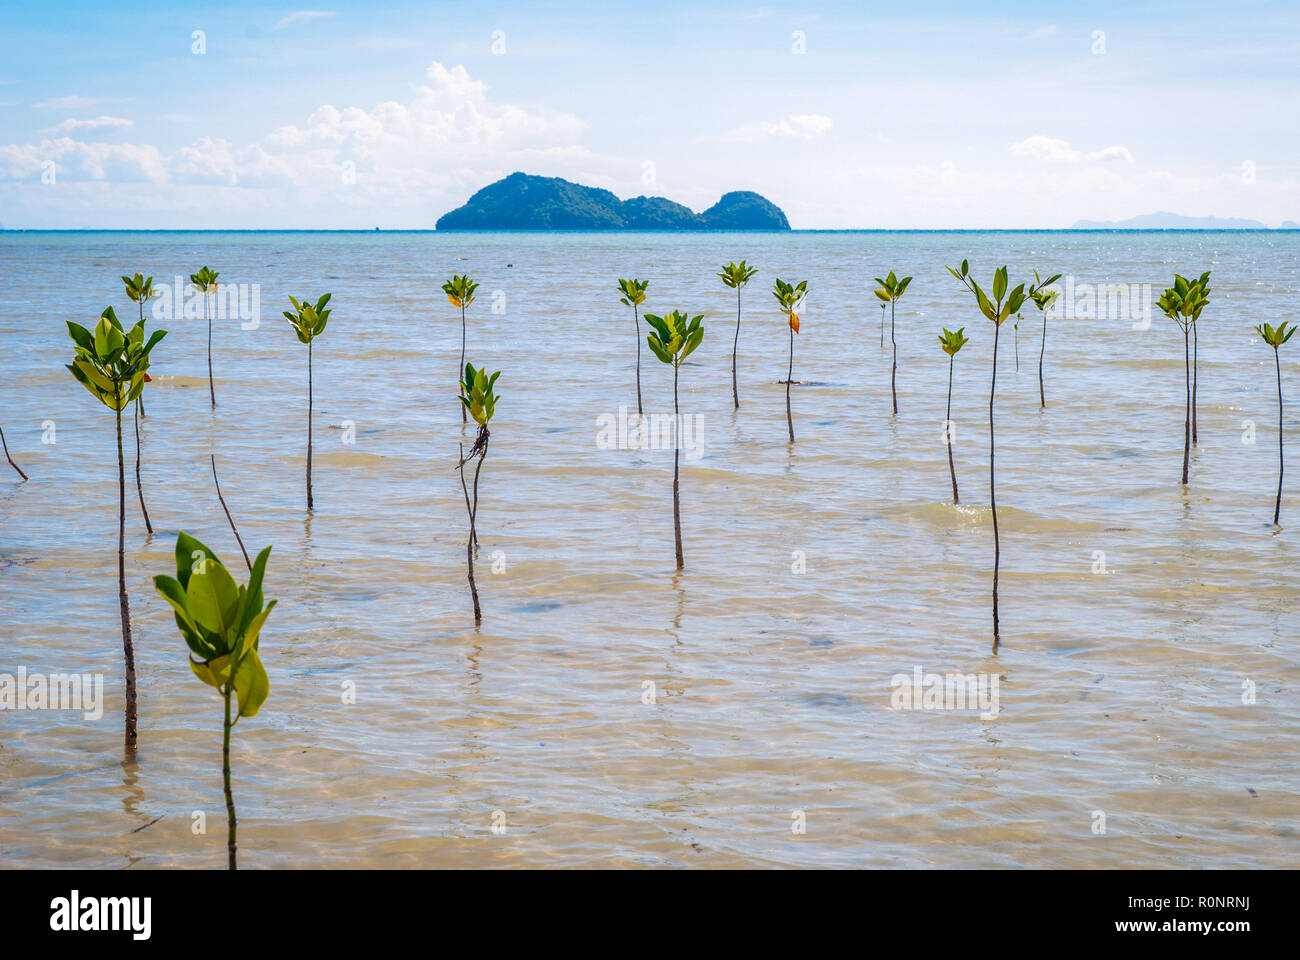 Mangrove plants growing at the coast in low tide, Koh Phangan, Thailand Stock Photo